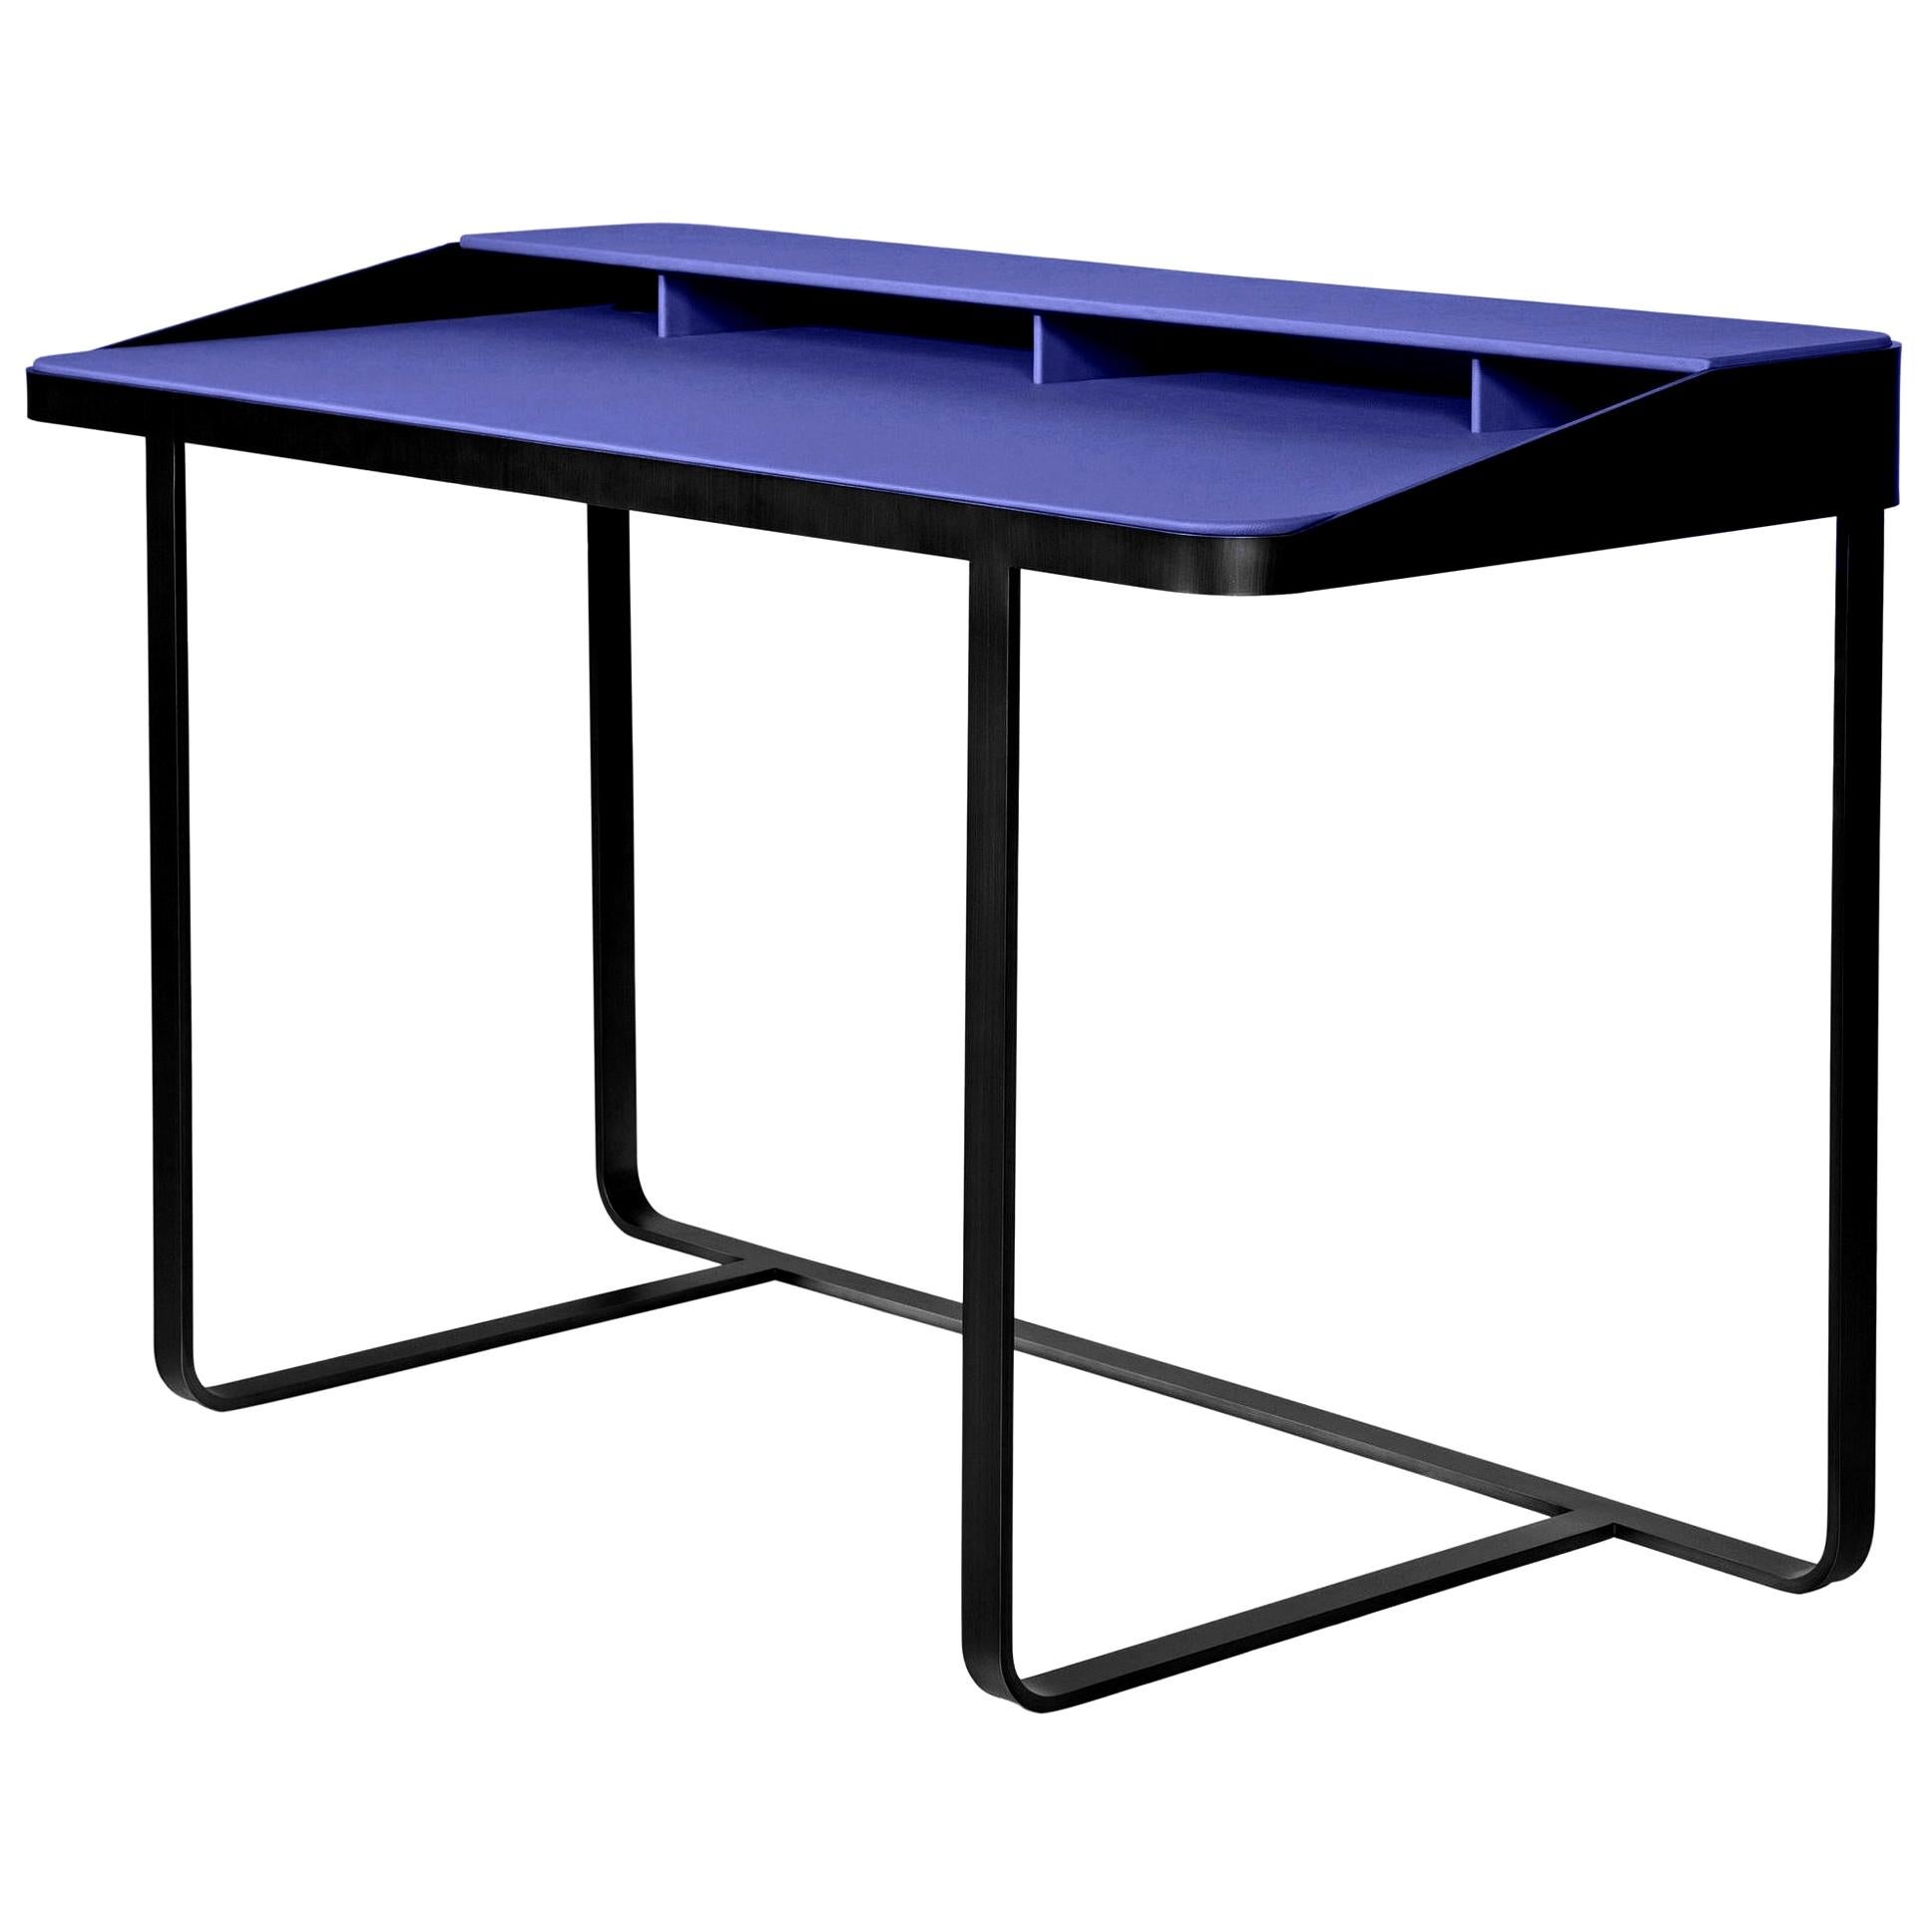 Twain Blue Leather Desk, Designed by Gordon Guillaumier, Made in Italy